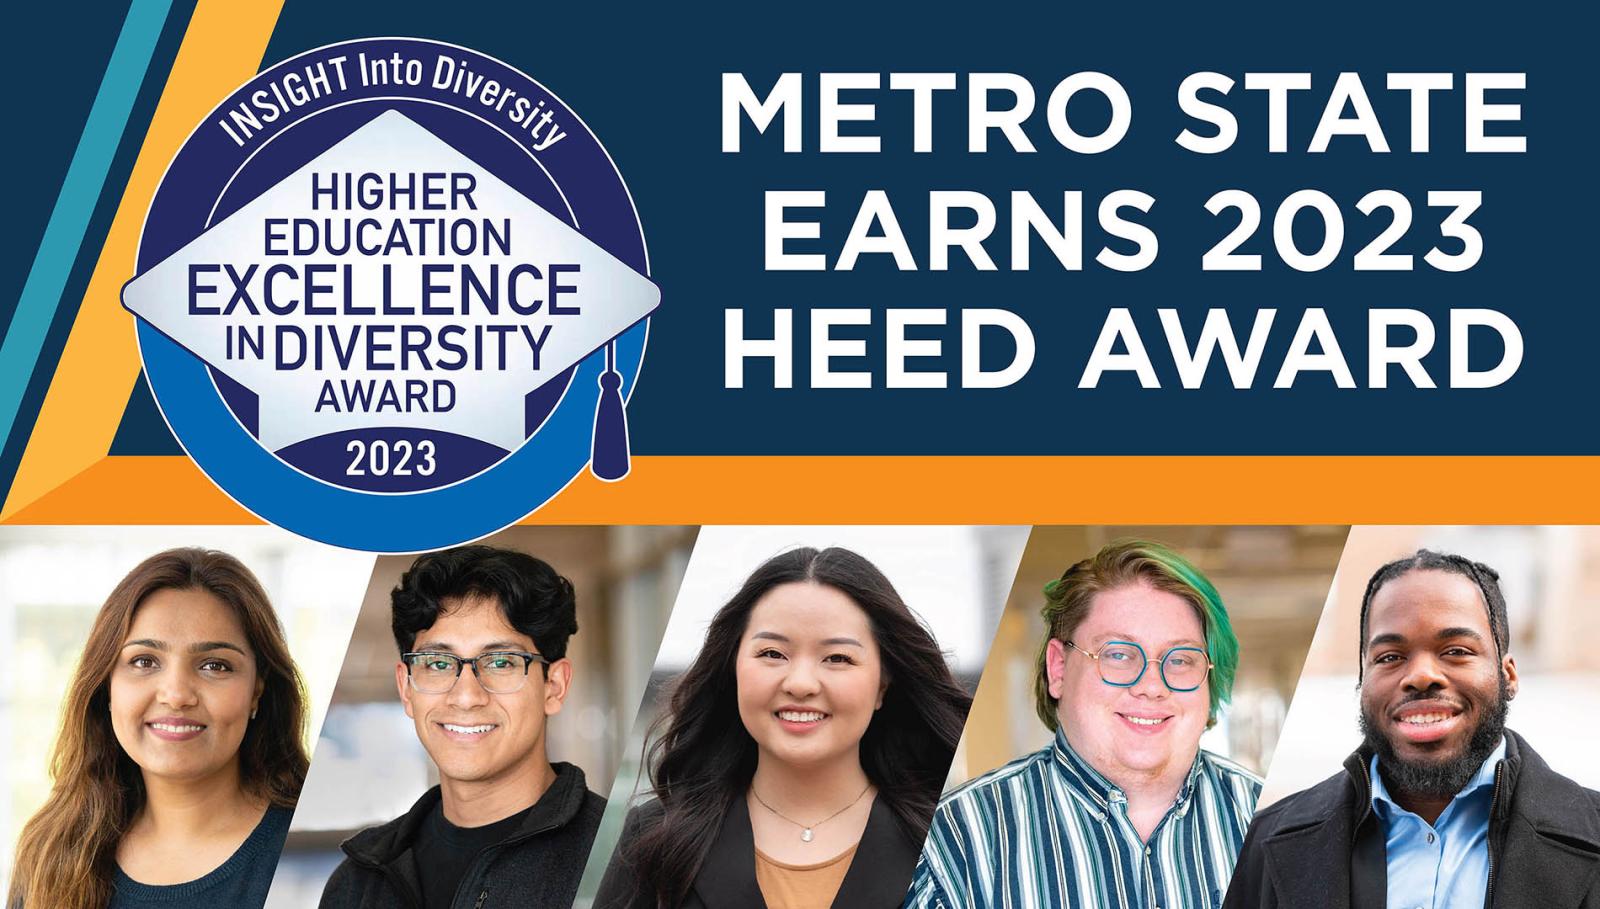 Insight into Diversity Magazine Higher Education Excellence in Diversity Award—Metro State Earns 2023 HEED Award